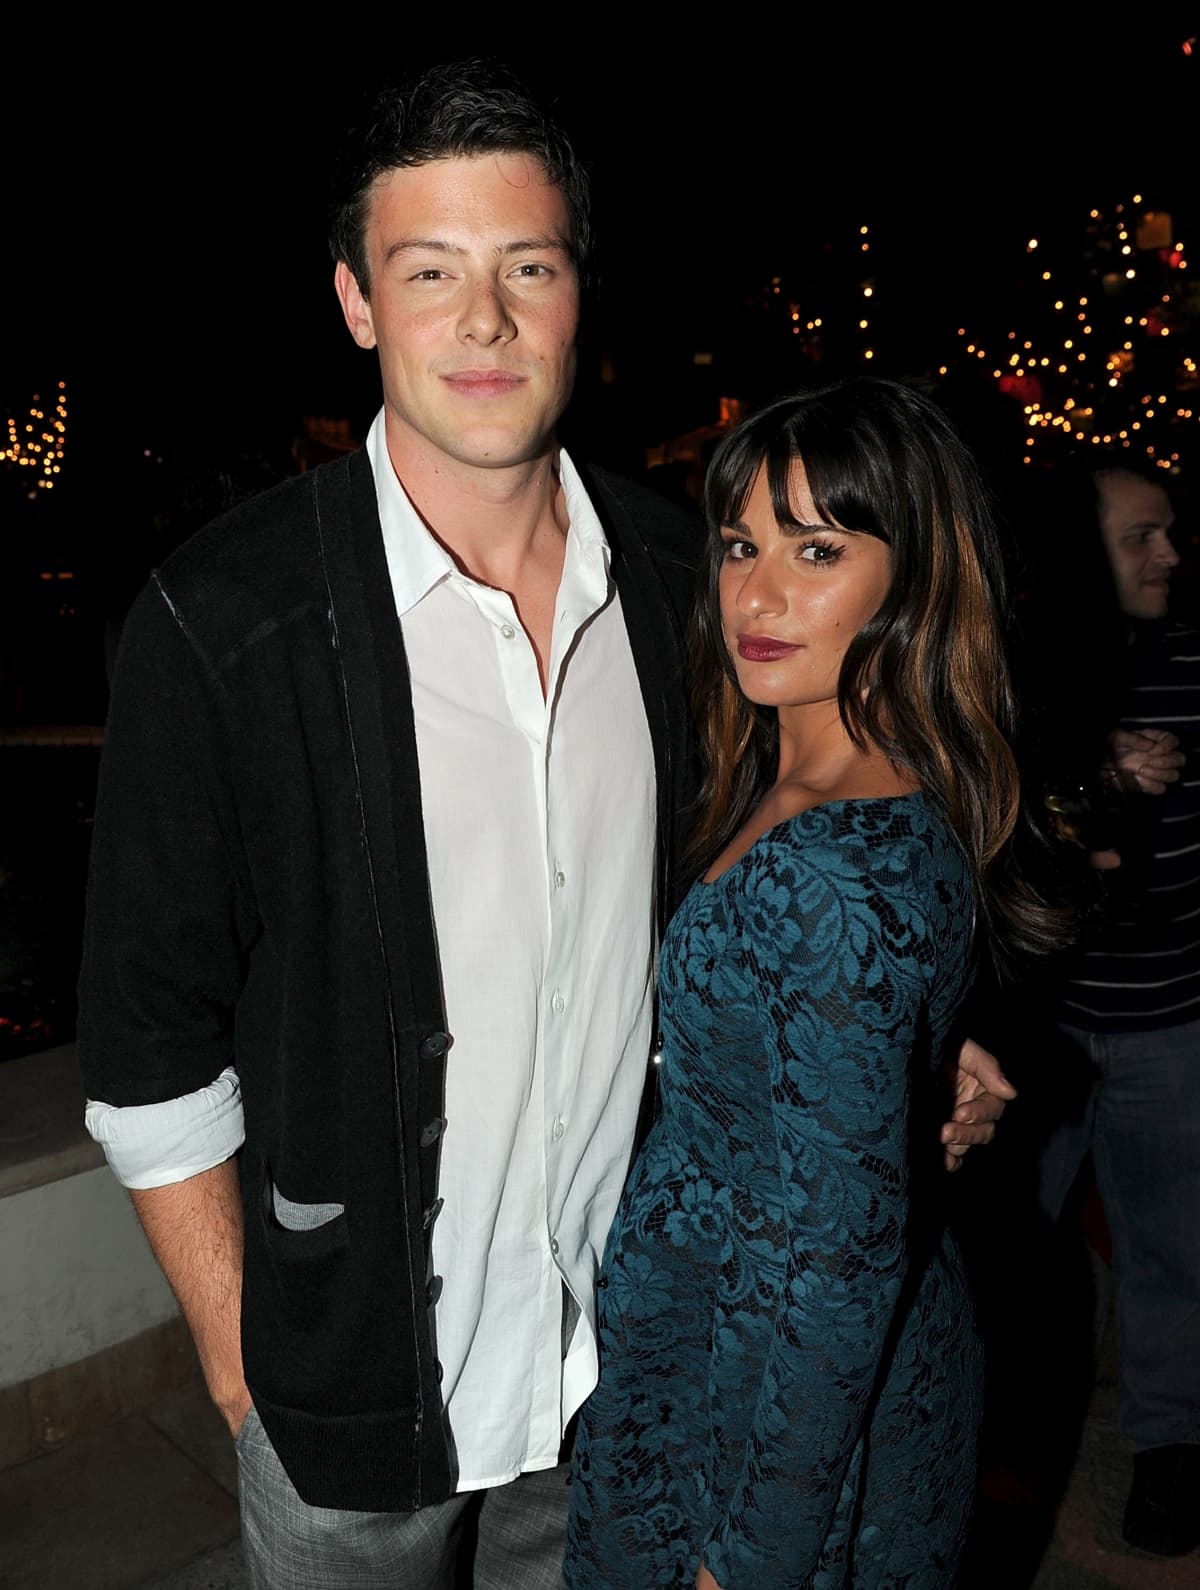 SANTA MONICA, CA - AUGUST 19:  Actors Cory Monteith and Lea Michele arrive for the 2012 Do Something Awards on August 19, 2012 in Santa Monica, California.  (Photo by Mark Sullivan/WireImage)